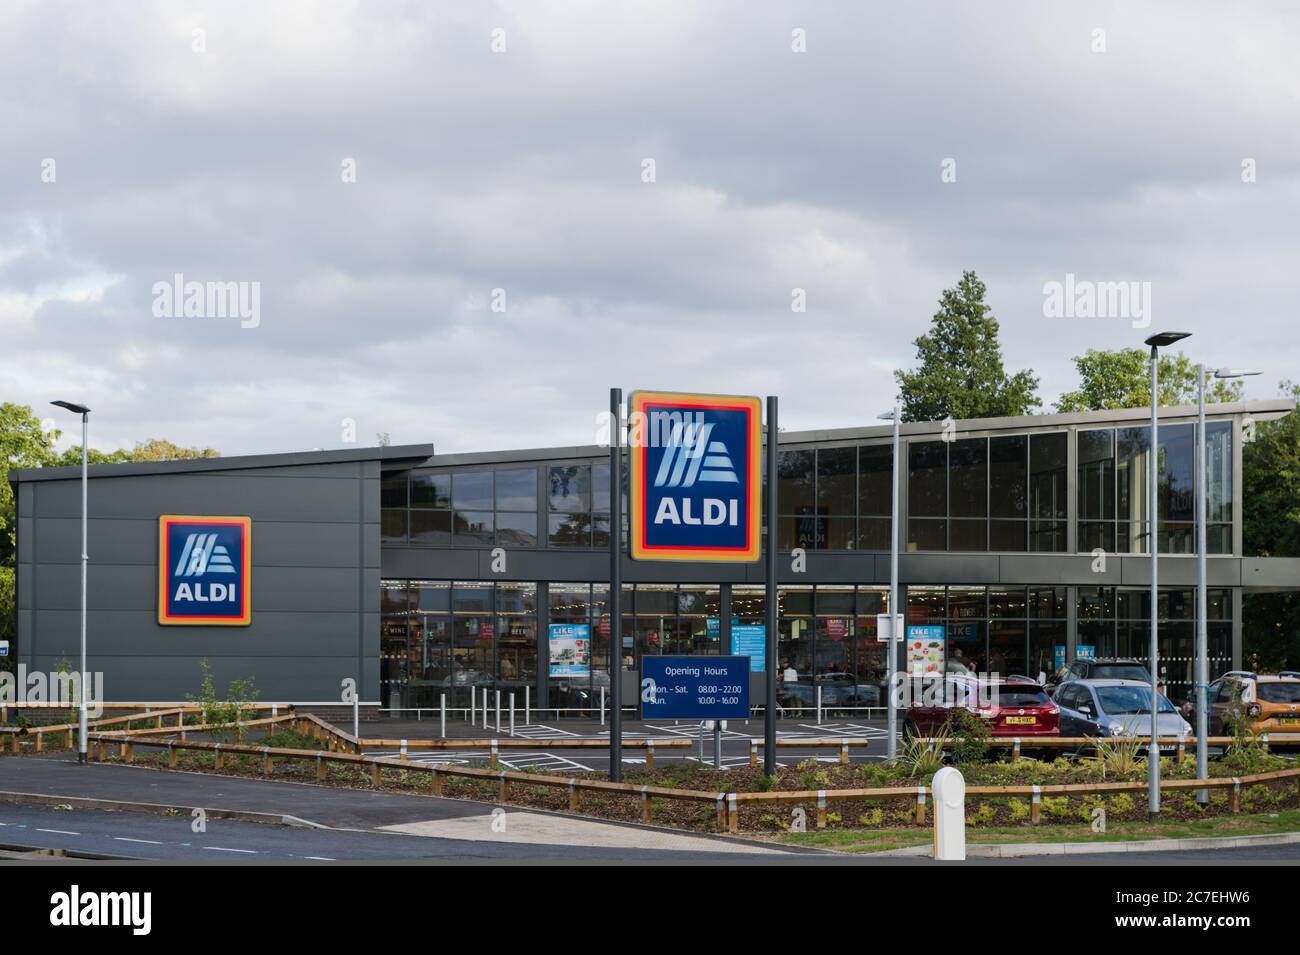 Aldi supermarket in Hertford, UK. The store was opened on the 16th July 2020. Stock Photo